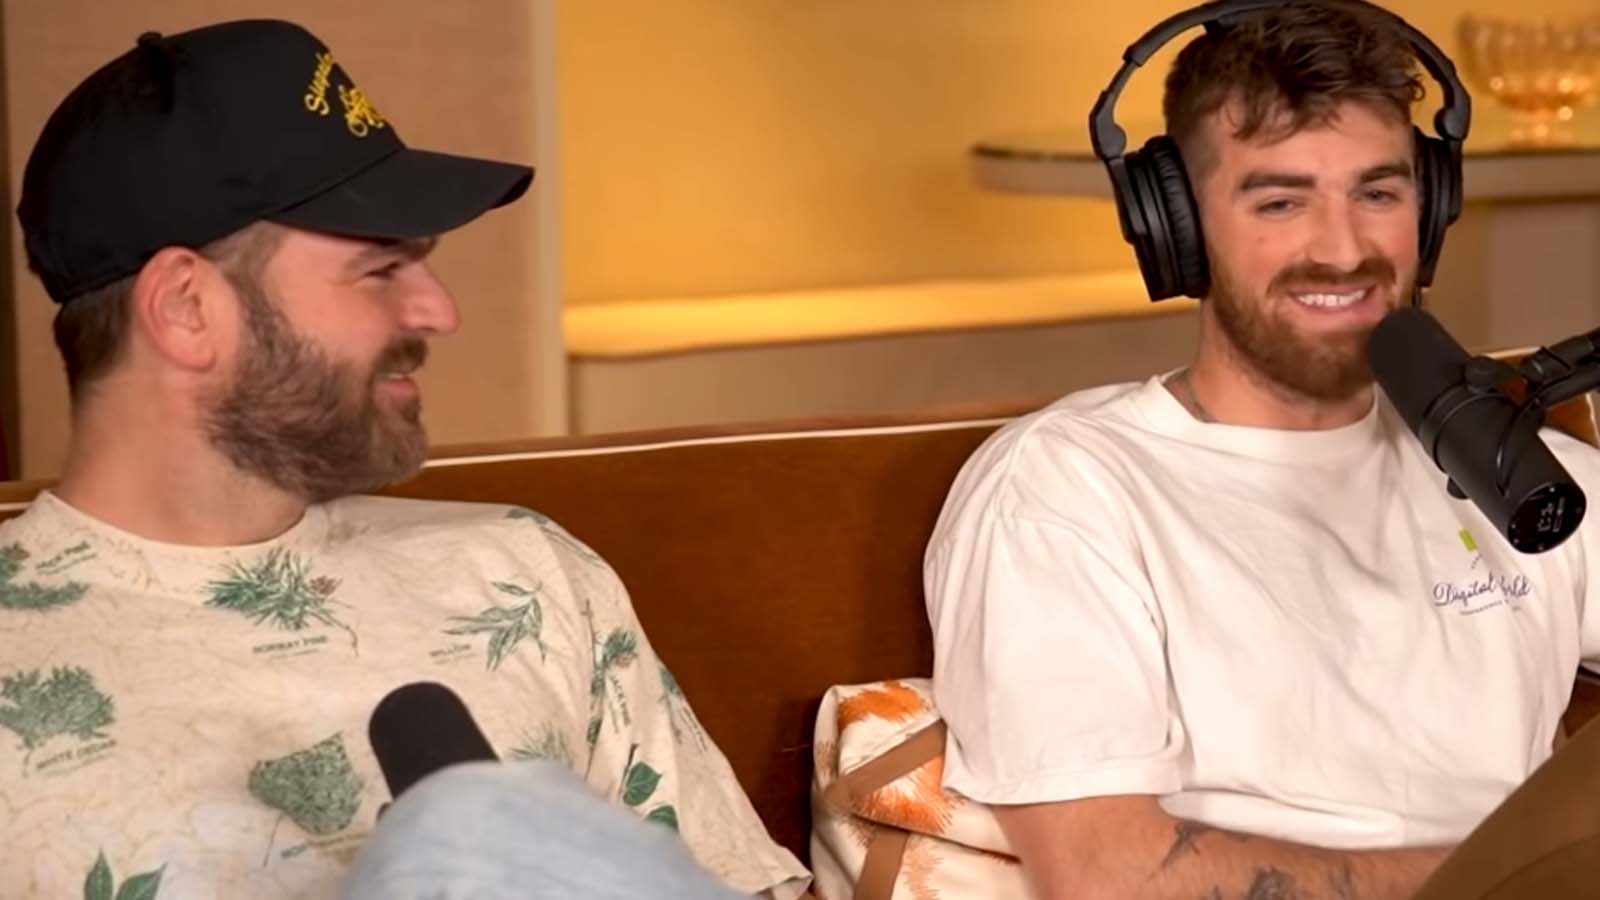 The Chainsmokers reveal truth behind benny blanco and charlie puth feud